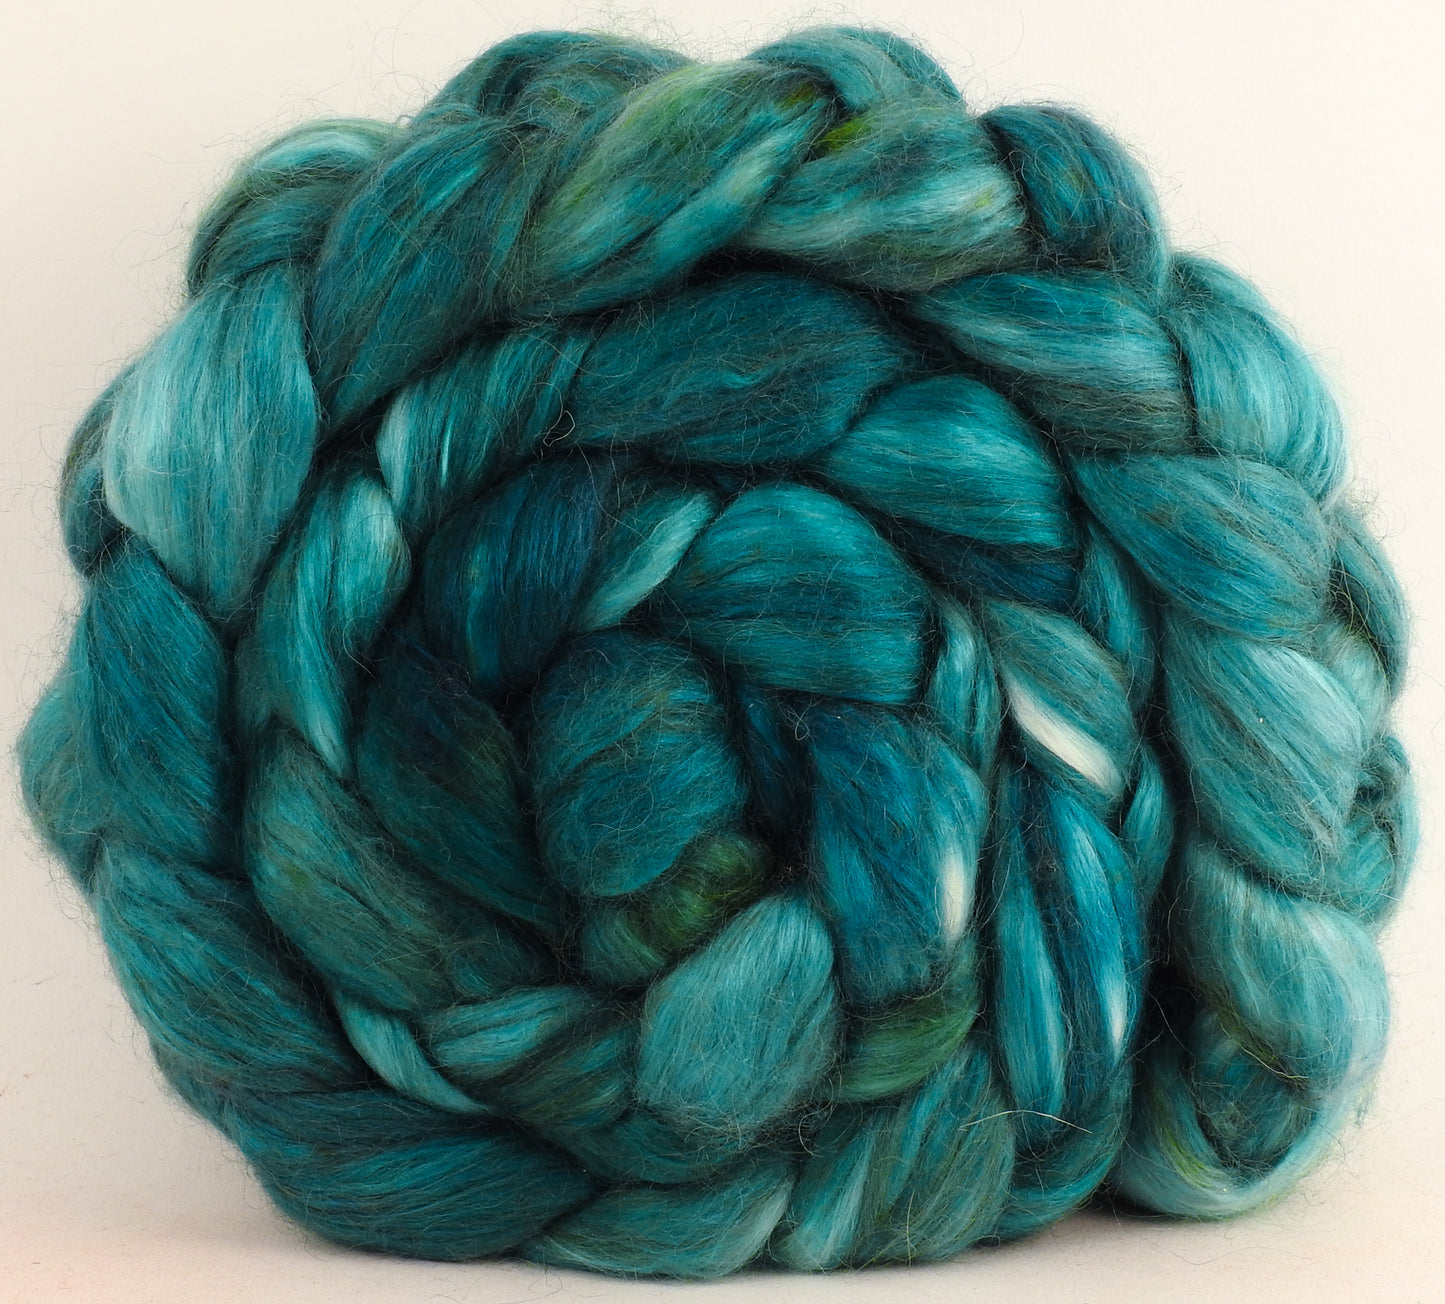 Faience - Wensleydale/ Mulberry silk roving (65/35)